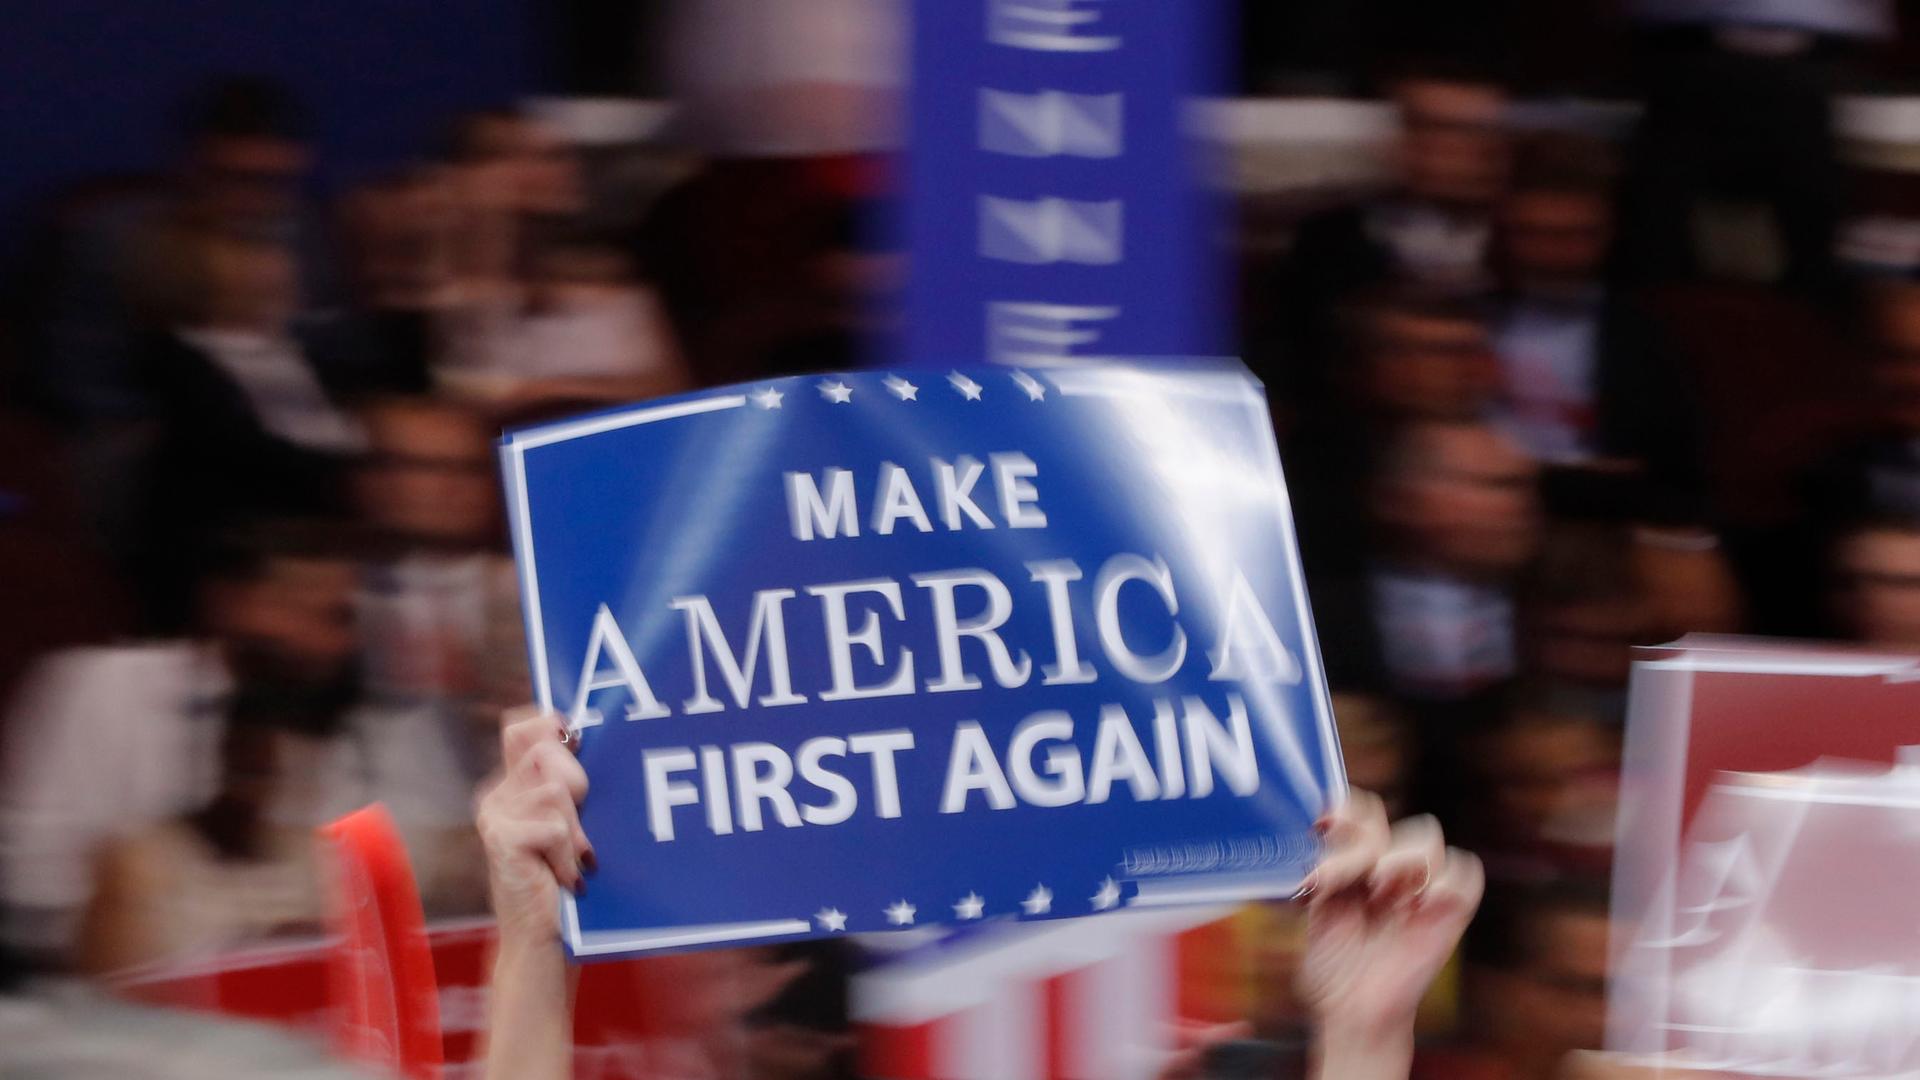 A delegate waves a "Make America First Again" sign at the Republican National Convention in Cleveland, Ohio, in July